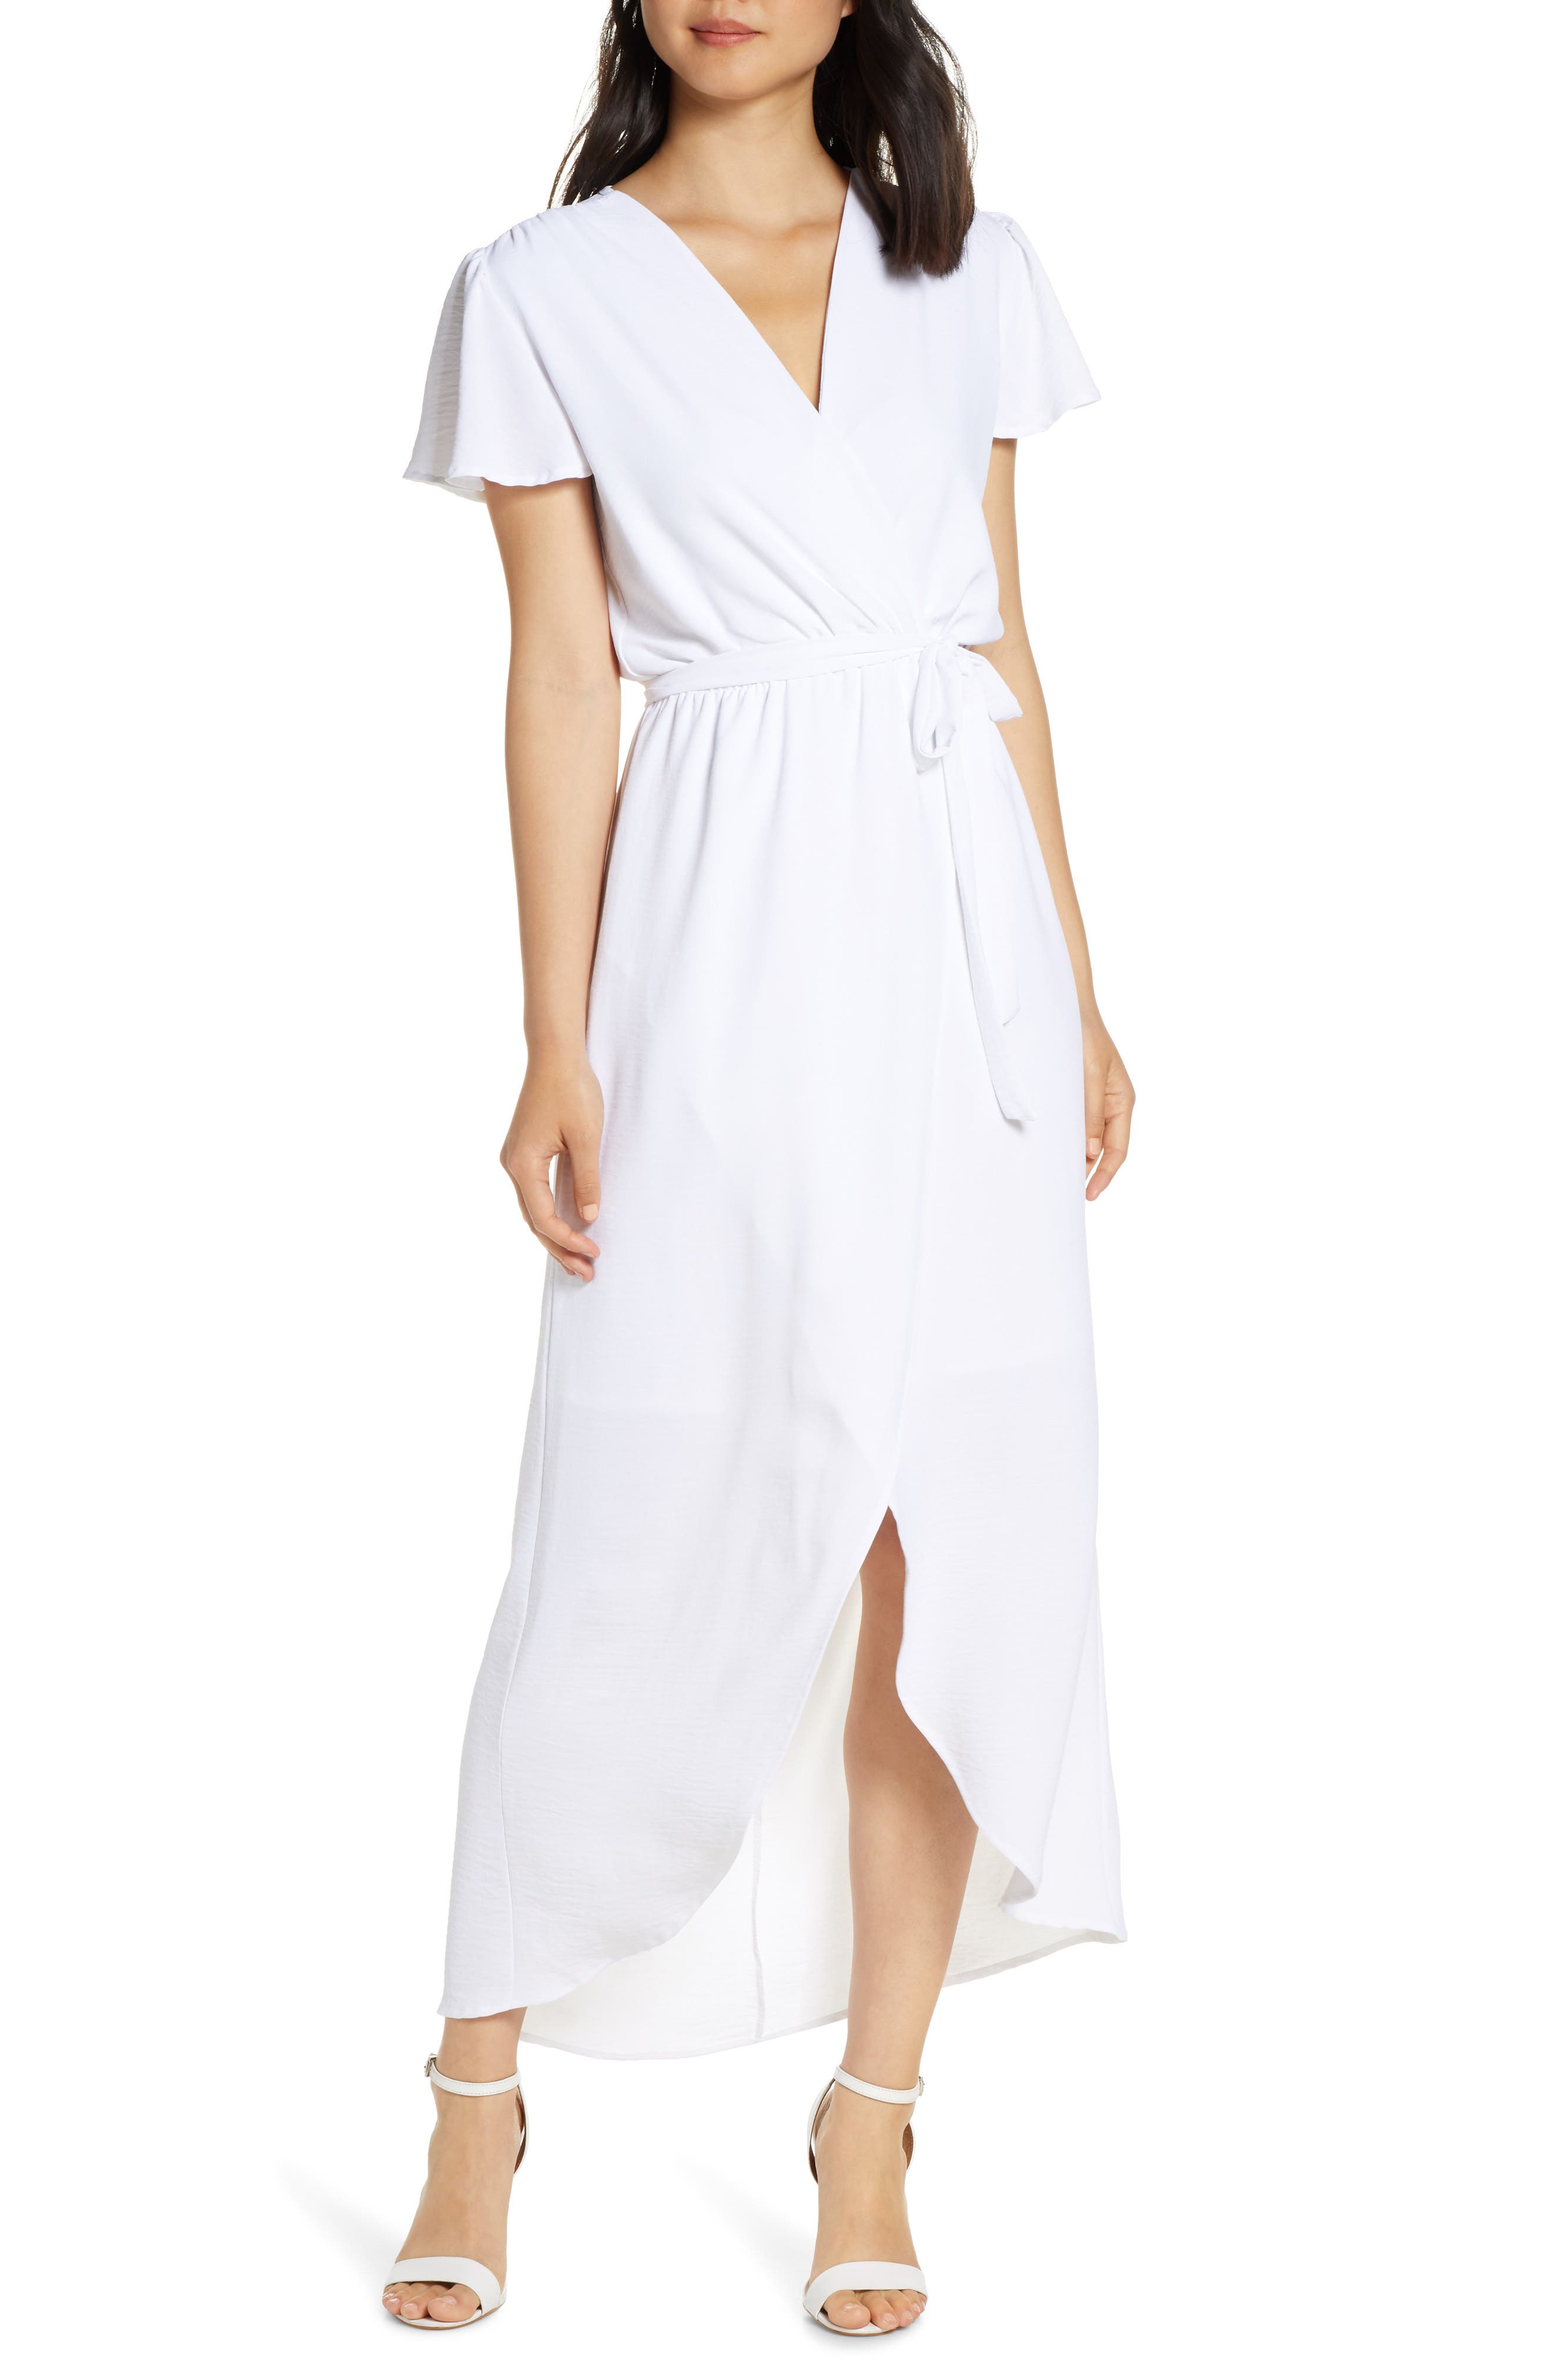 white flowy maxi dress with sleeves